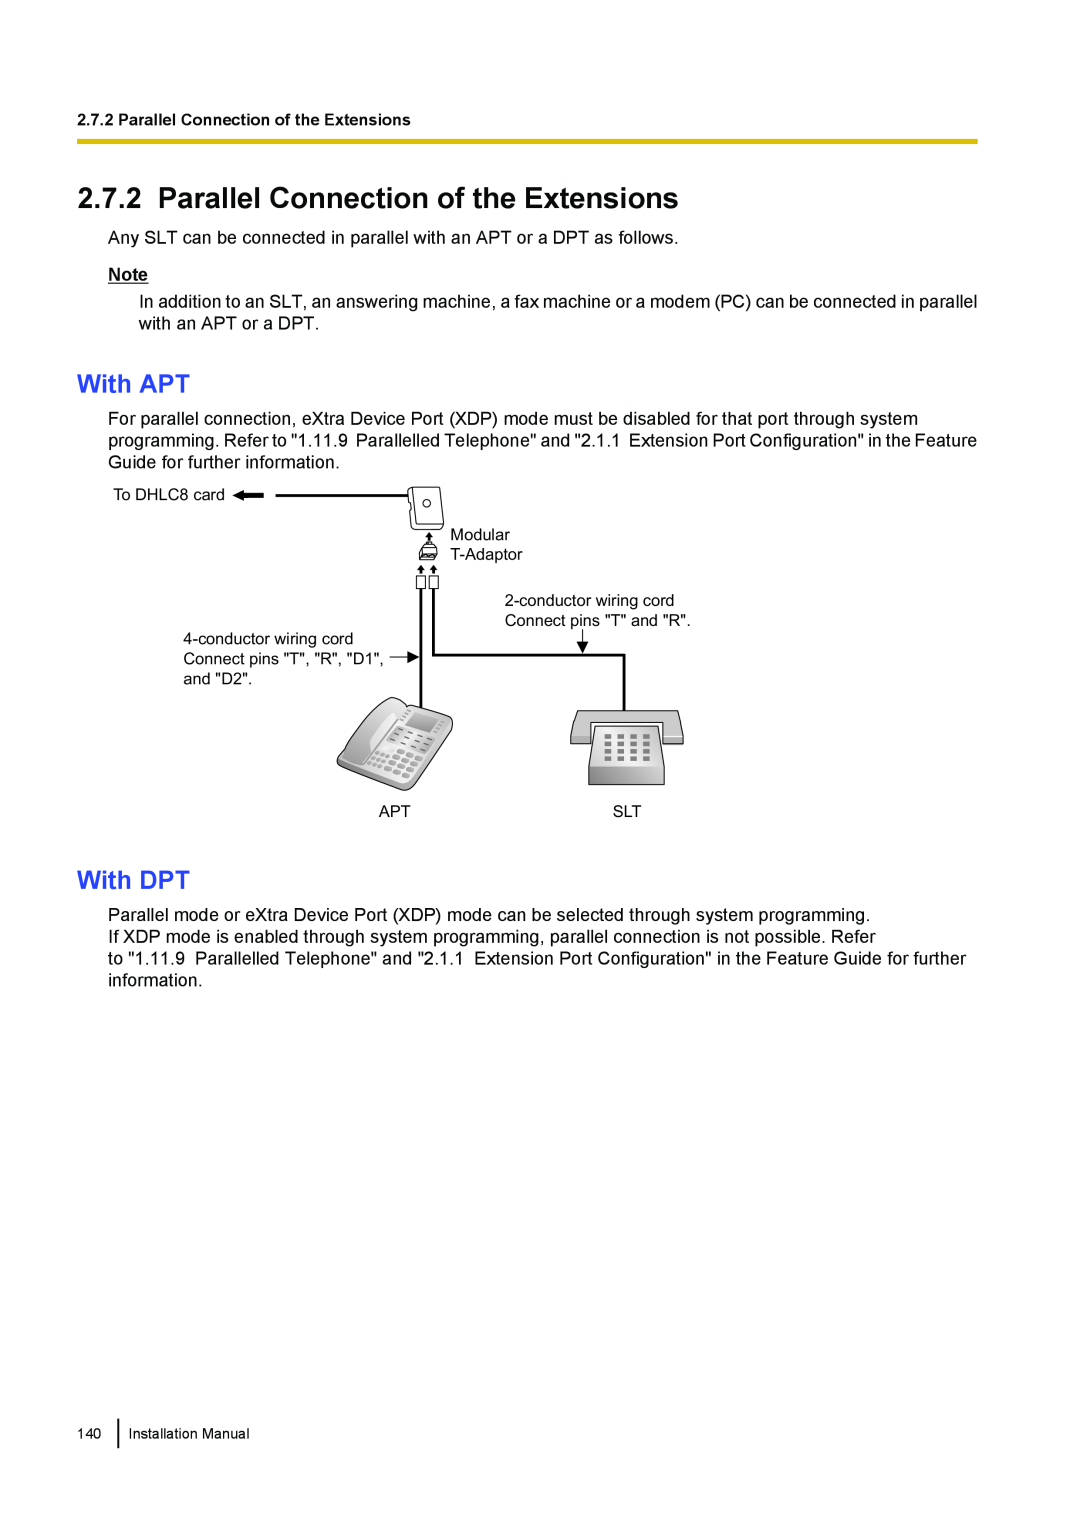 Panasonic KX-TDA100 installation manual Parallel Connection of the Extensions, With APT, With DPT 